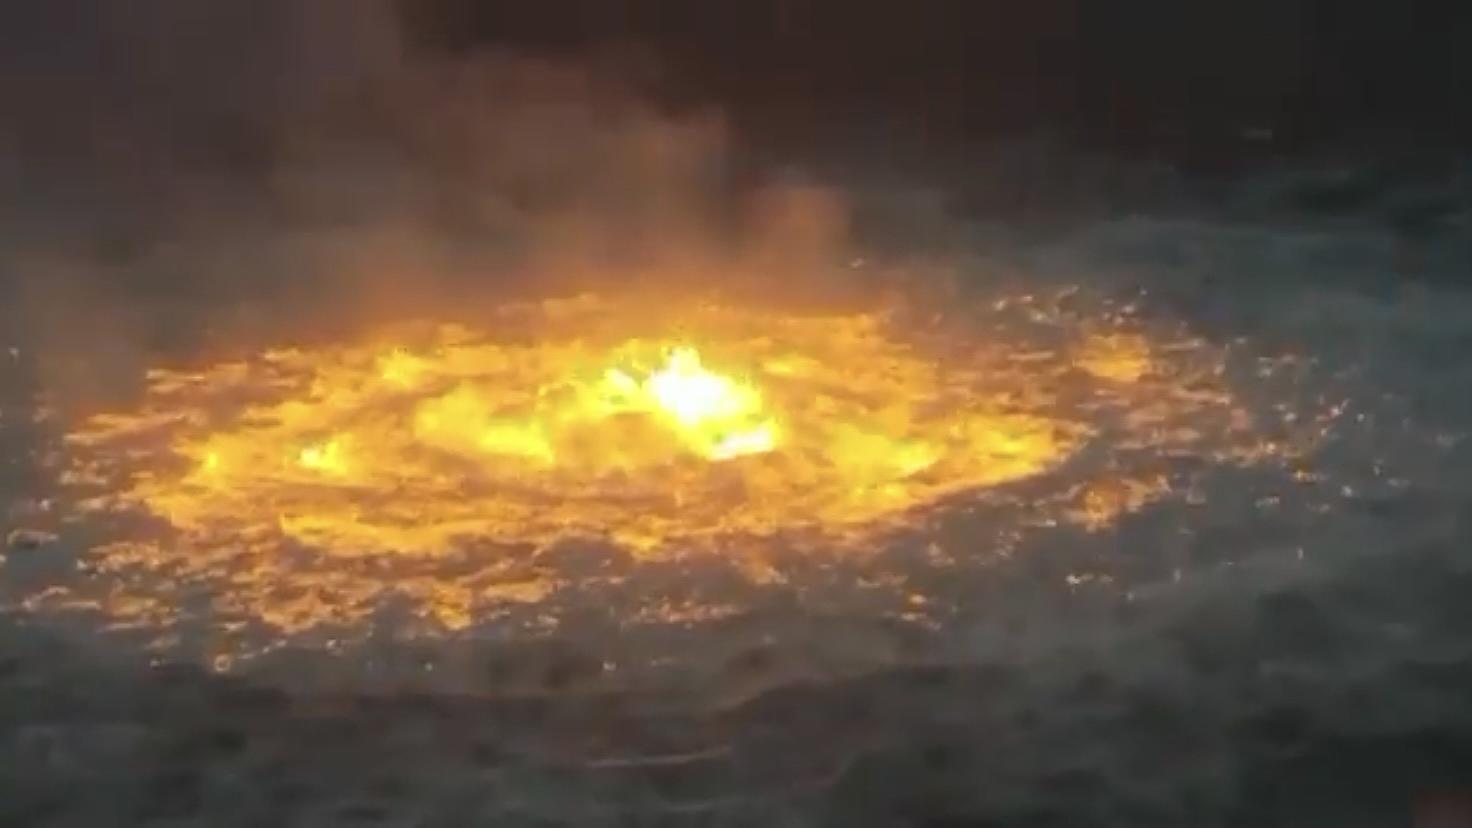 Mexican oil company says gas leak caused fire in Mexican waters.